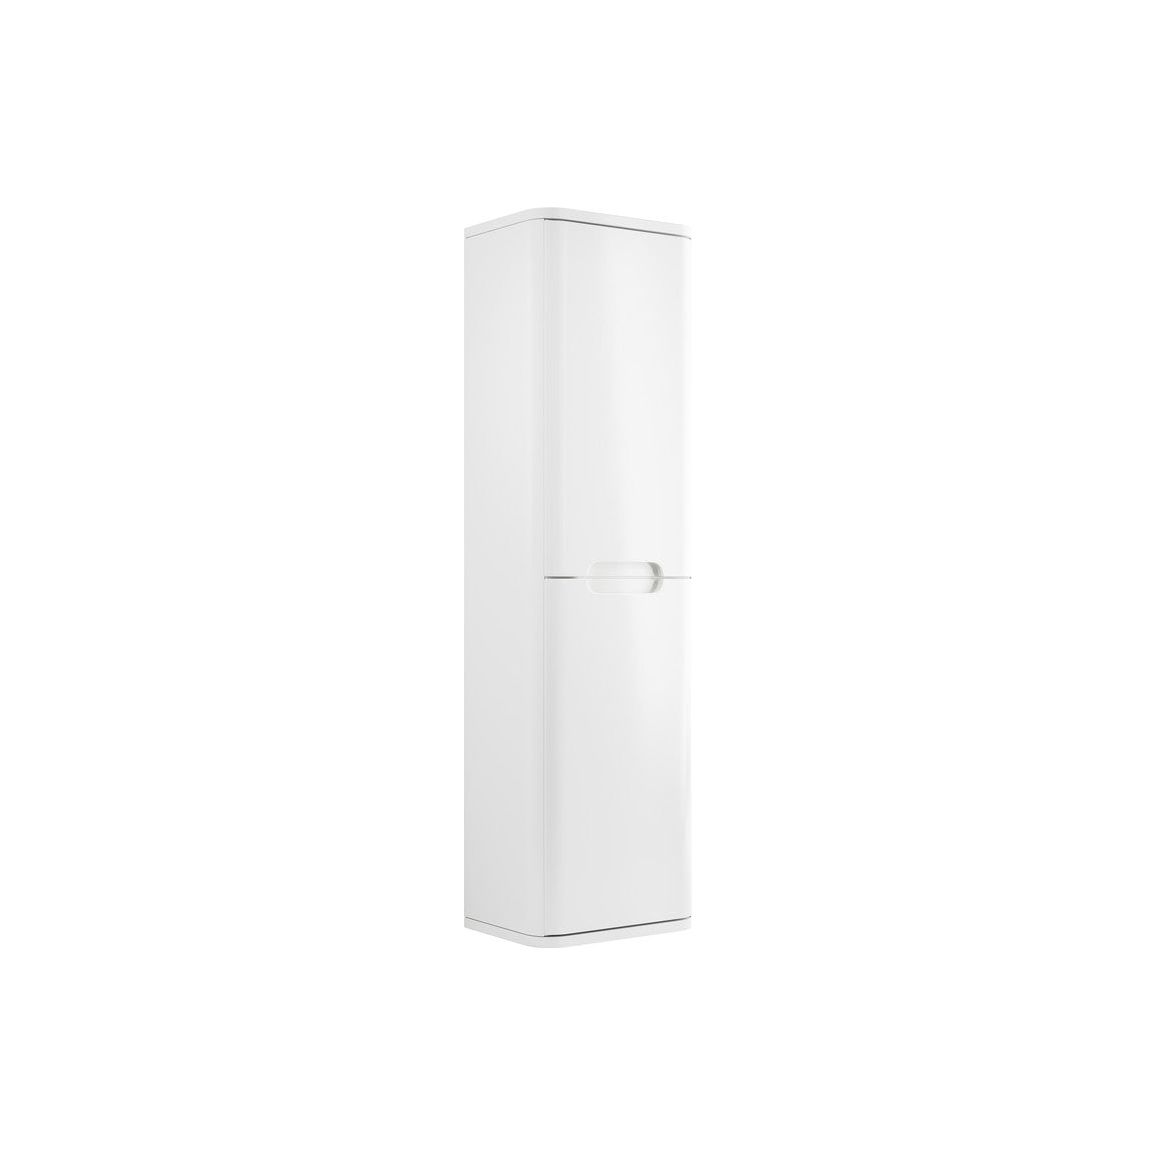 Fawn 350mm 2 Door Wall Hung Tall Unit - White Gloss